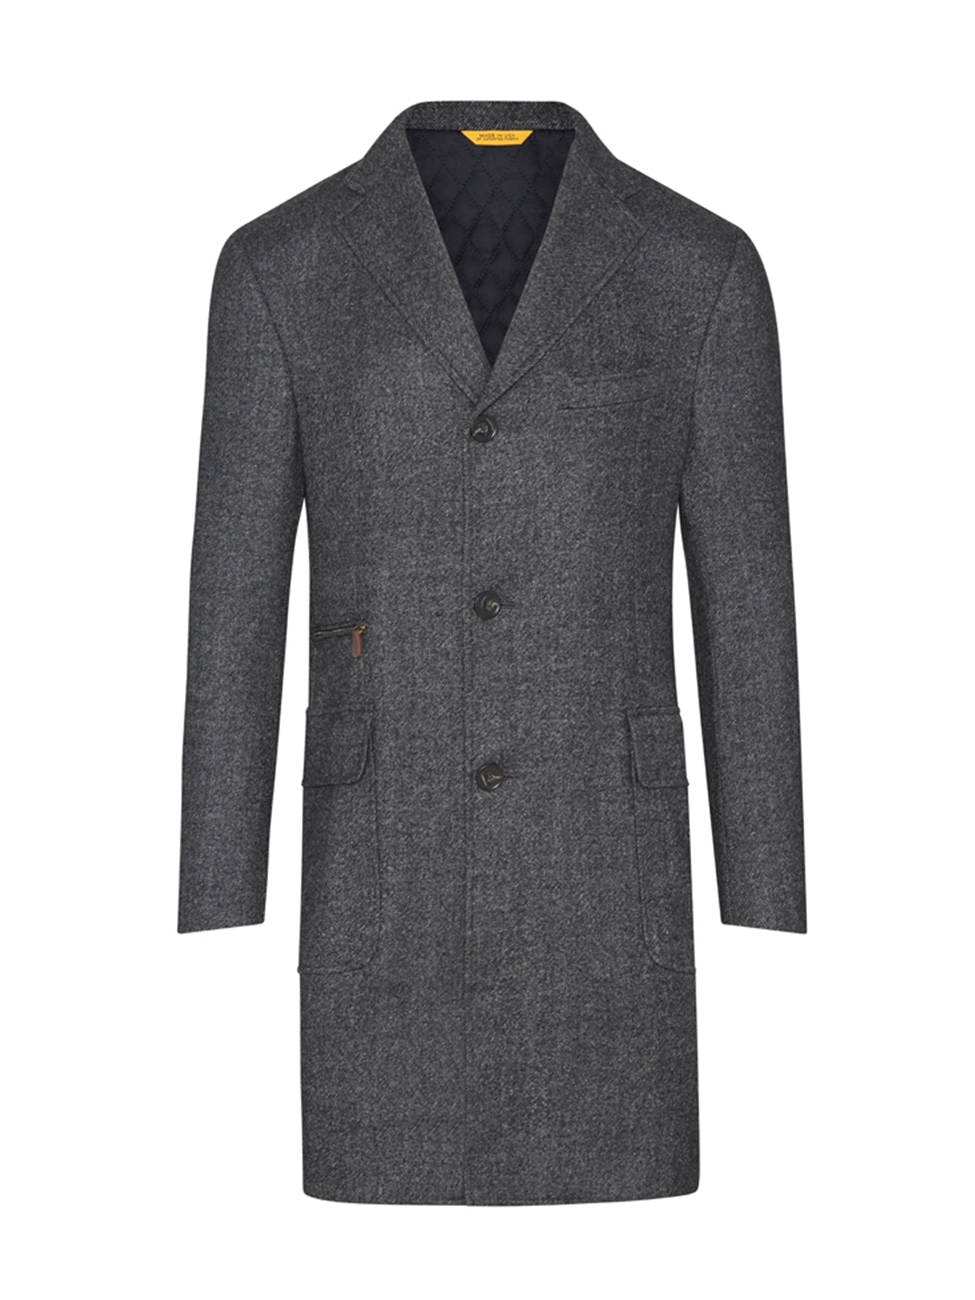 Charcoal Twill Double Faced Half Lined Wool Overcoat | Hickey Freeman